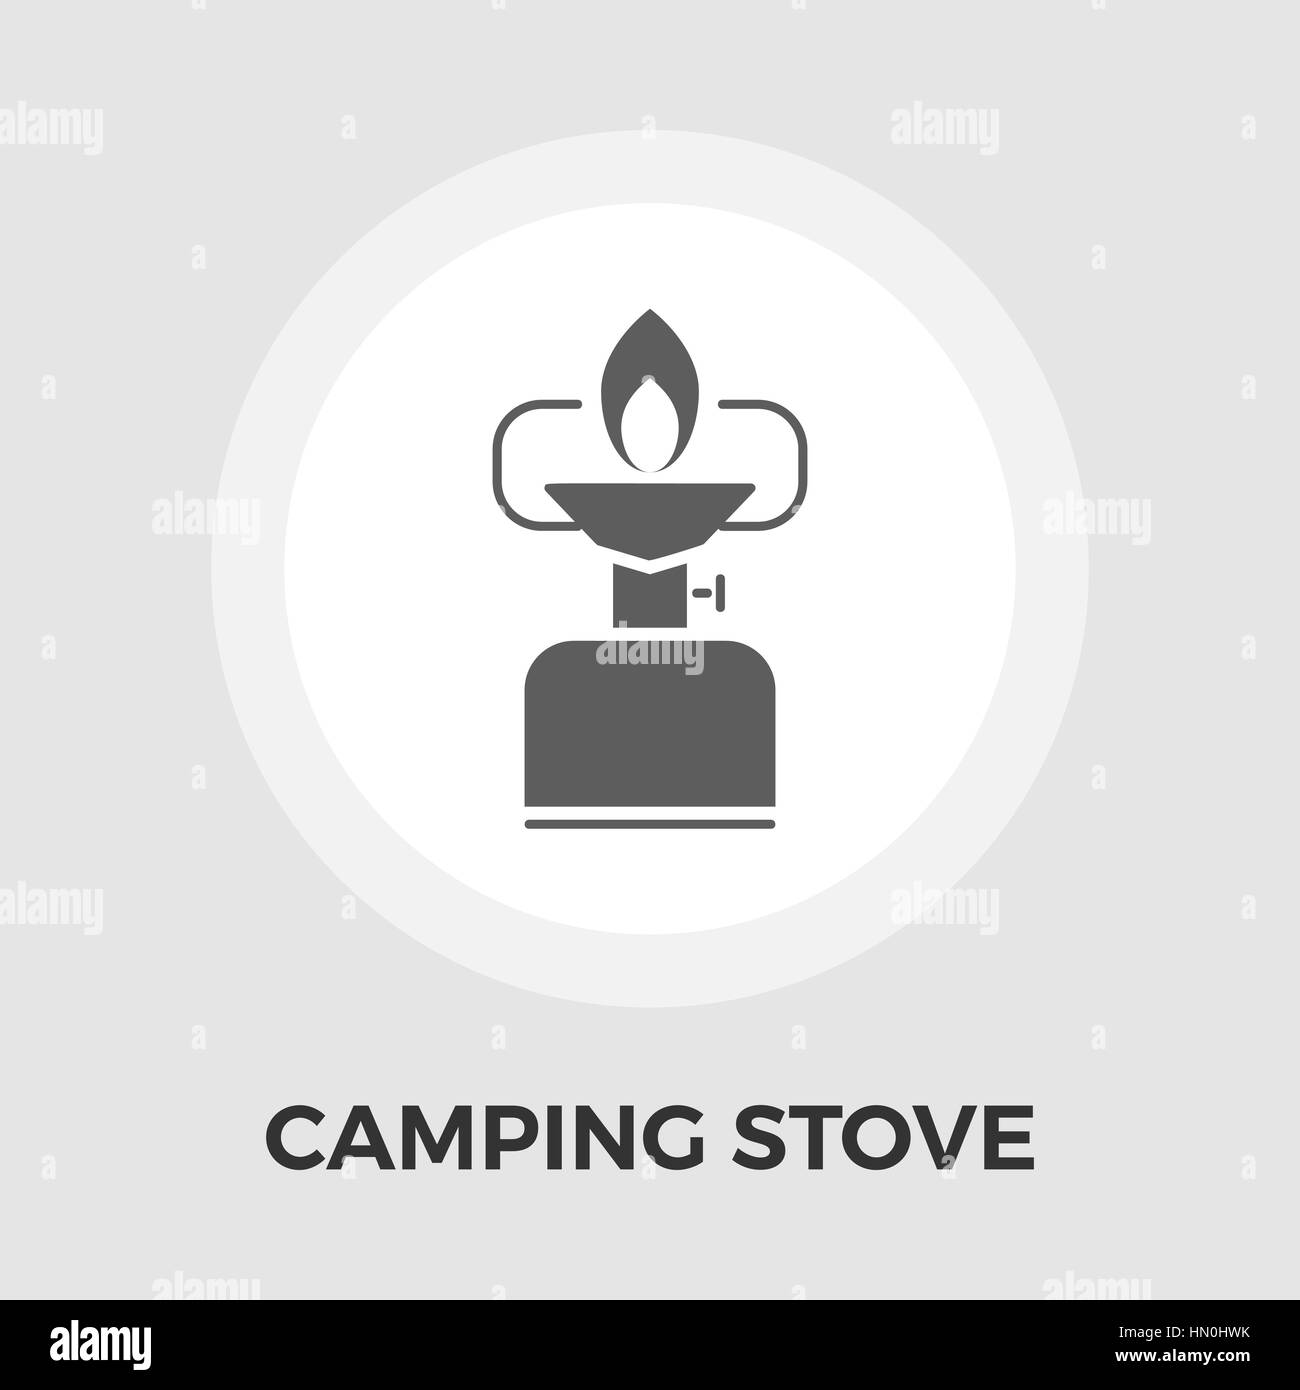 Camping stove icon vector. Flat icon isolated on the white background. Editable EPS file. Vector illustration. Stock Vector